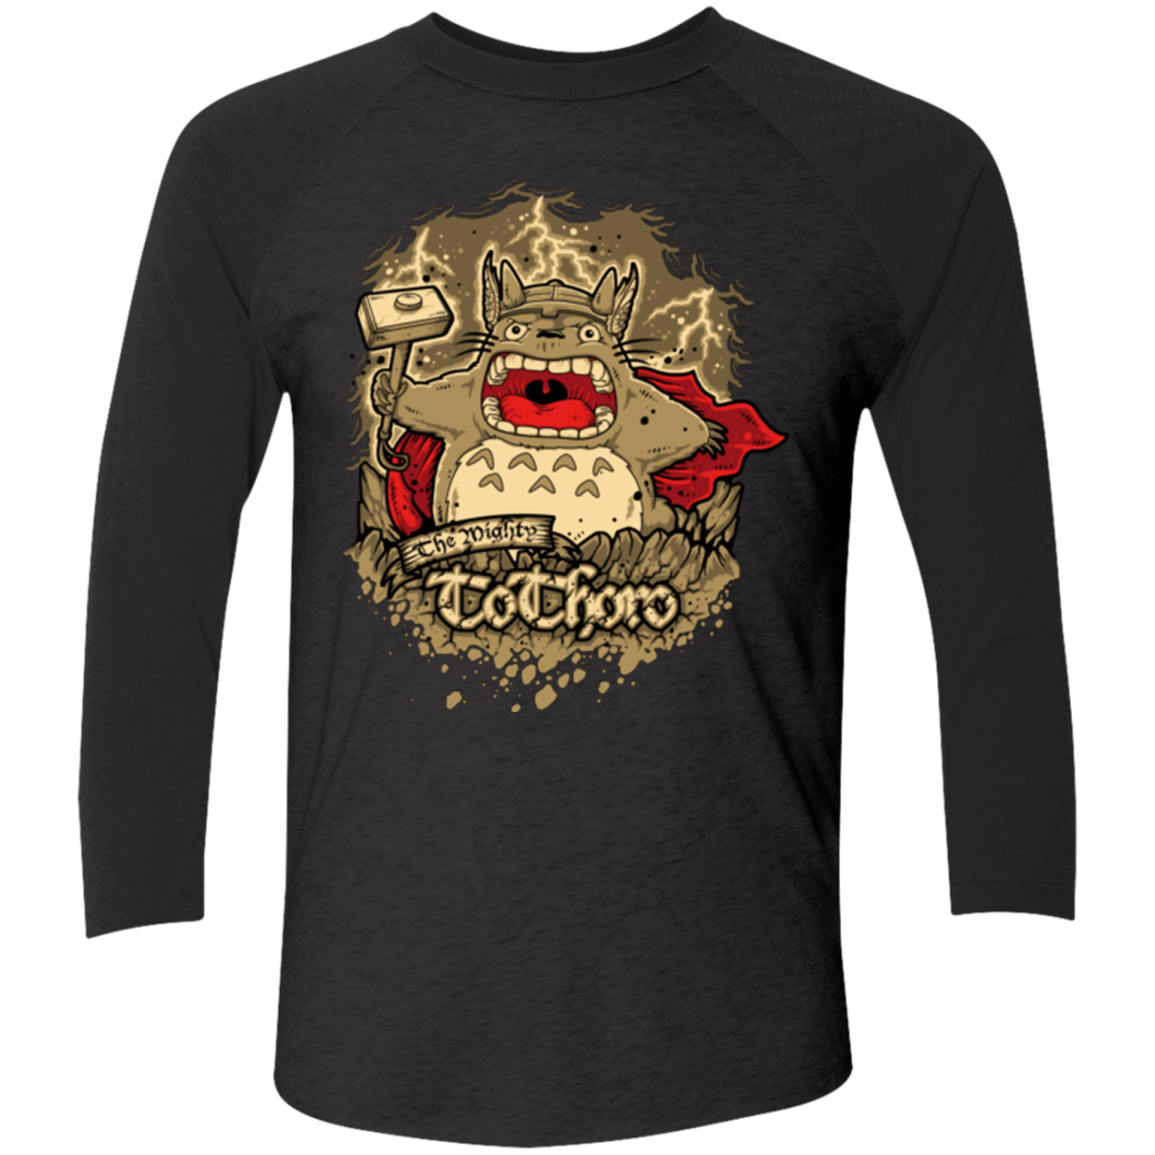 The Mighty Tothoro Men's Triblend 3/4 Sleeve